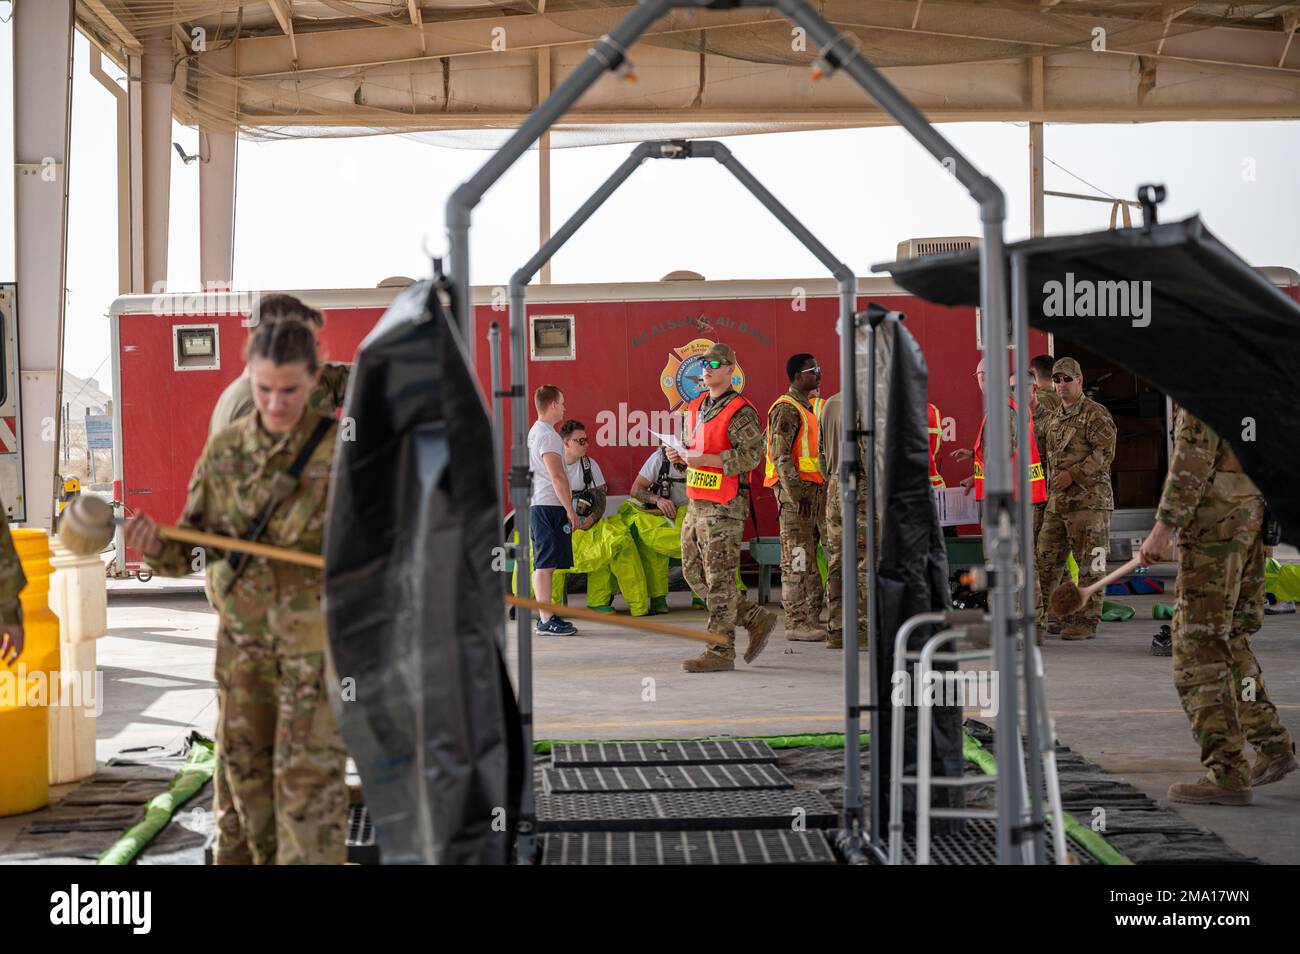 U.S. Airmen playing the roles of incident commander, public information officer, safety officer and operations officer, discuss the progress of a simulated hazardous materials scenario at Fire Station 2 at Ali Al Salem Air Base, Kuwait, May 22, 2022. The 386th Expeditionary Civil Engineer Squadron Fire Department conducted a certification evaluation for hazardous materials incident commanders and technicians on base. The hands-on portion of the certification consisted of three simulated scenarios: stopping a one-ton container, typically used for storage, from leaking chlorine from its fusible Stock Photo